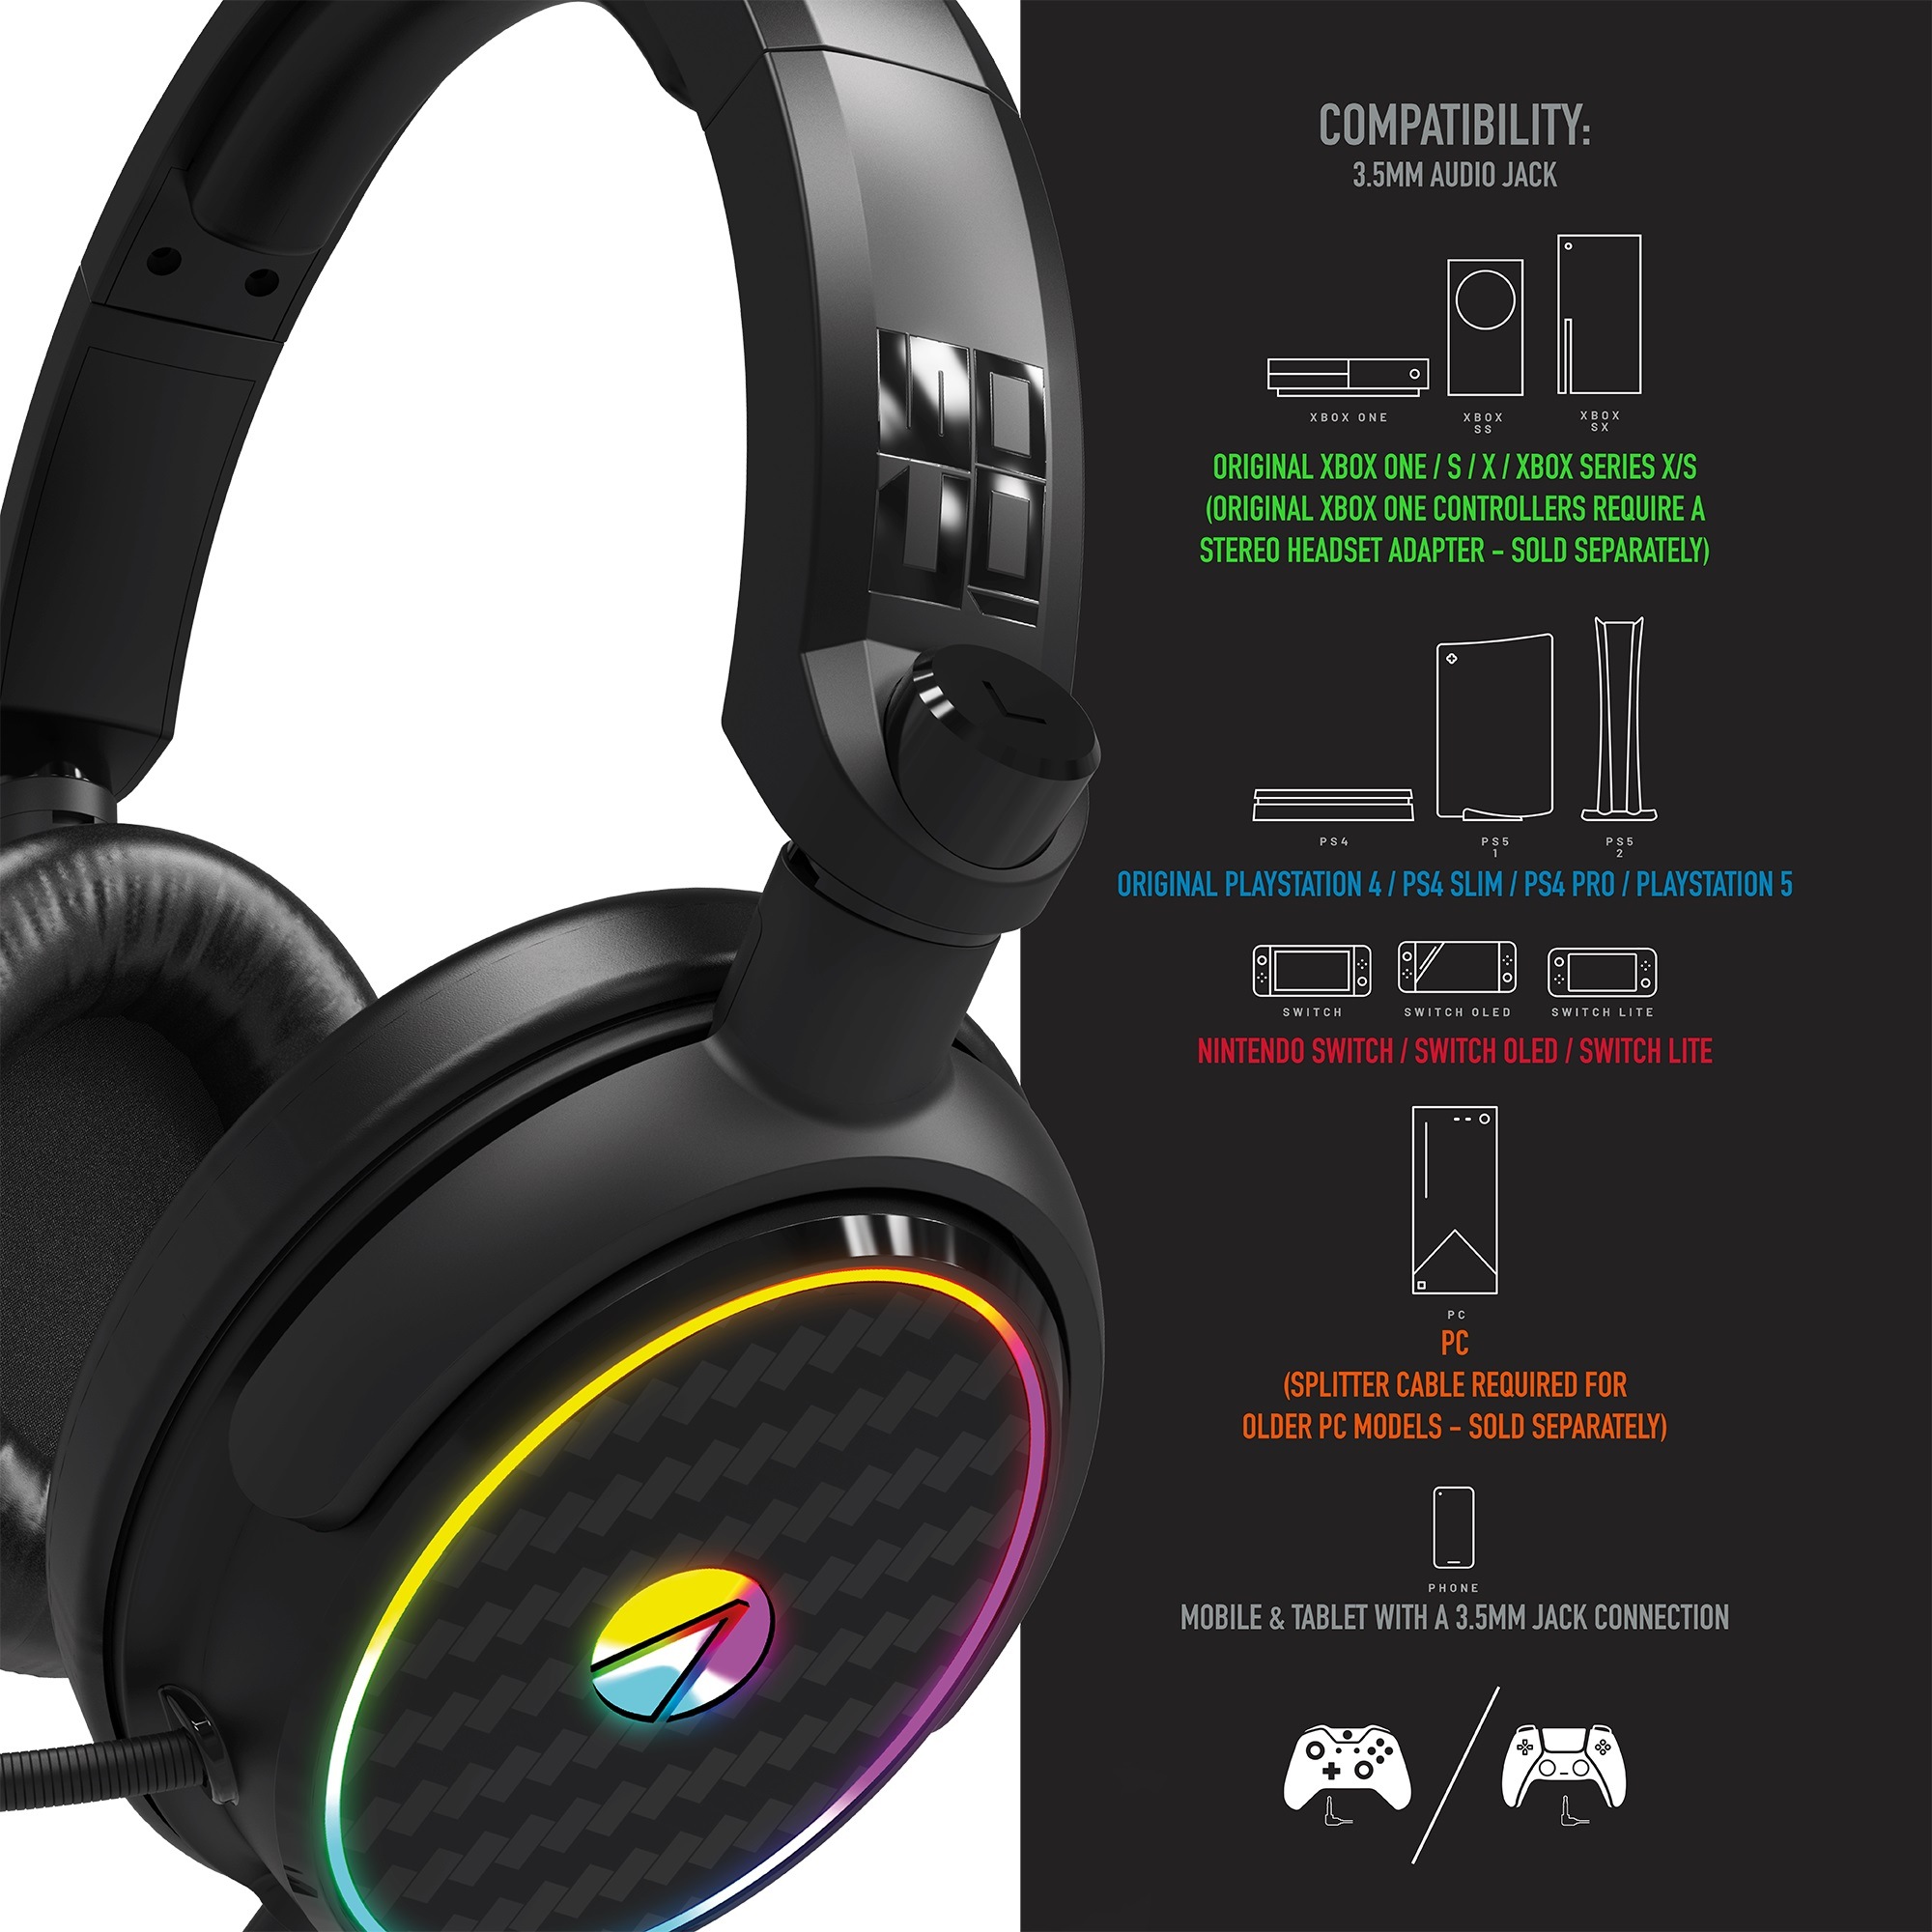 Stealth Gaming-Headset »Stereo Gaming Headset Verpackung kaufen C6-100 | online LED Plastikfreie mit UNIVERSAL Beleuchtung«